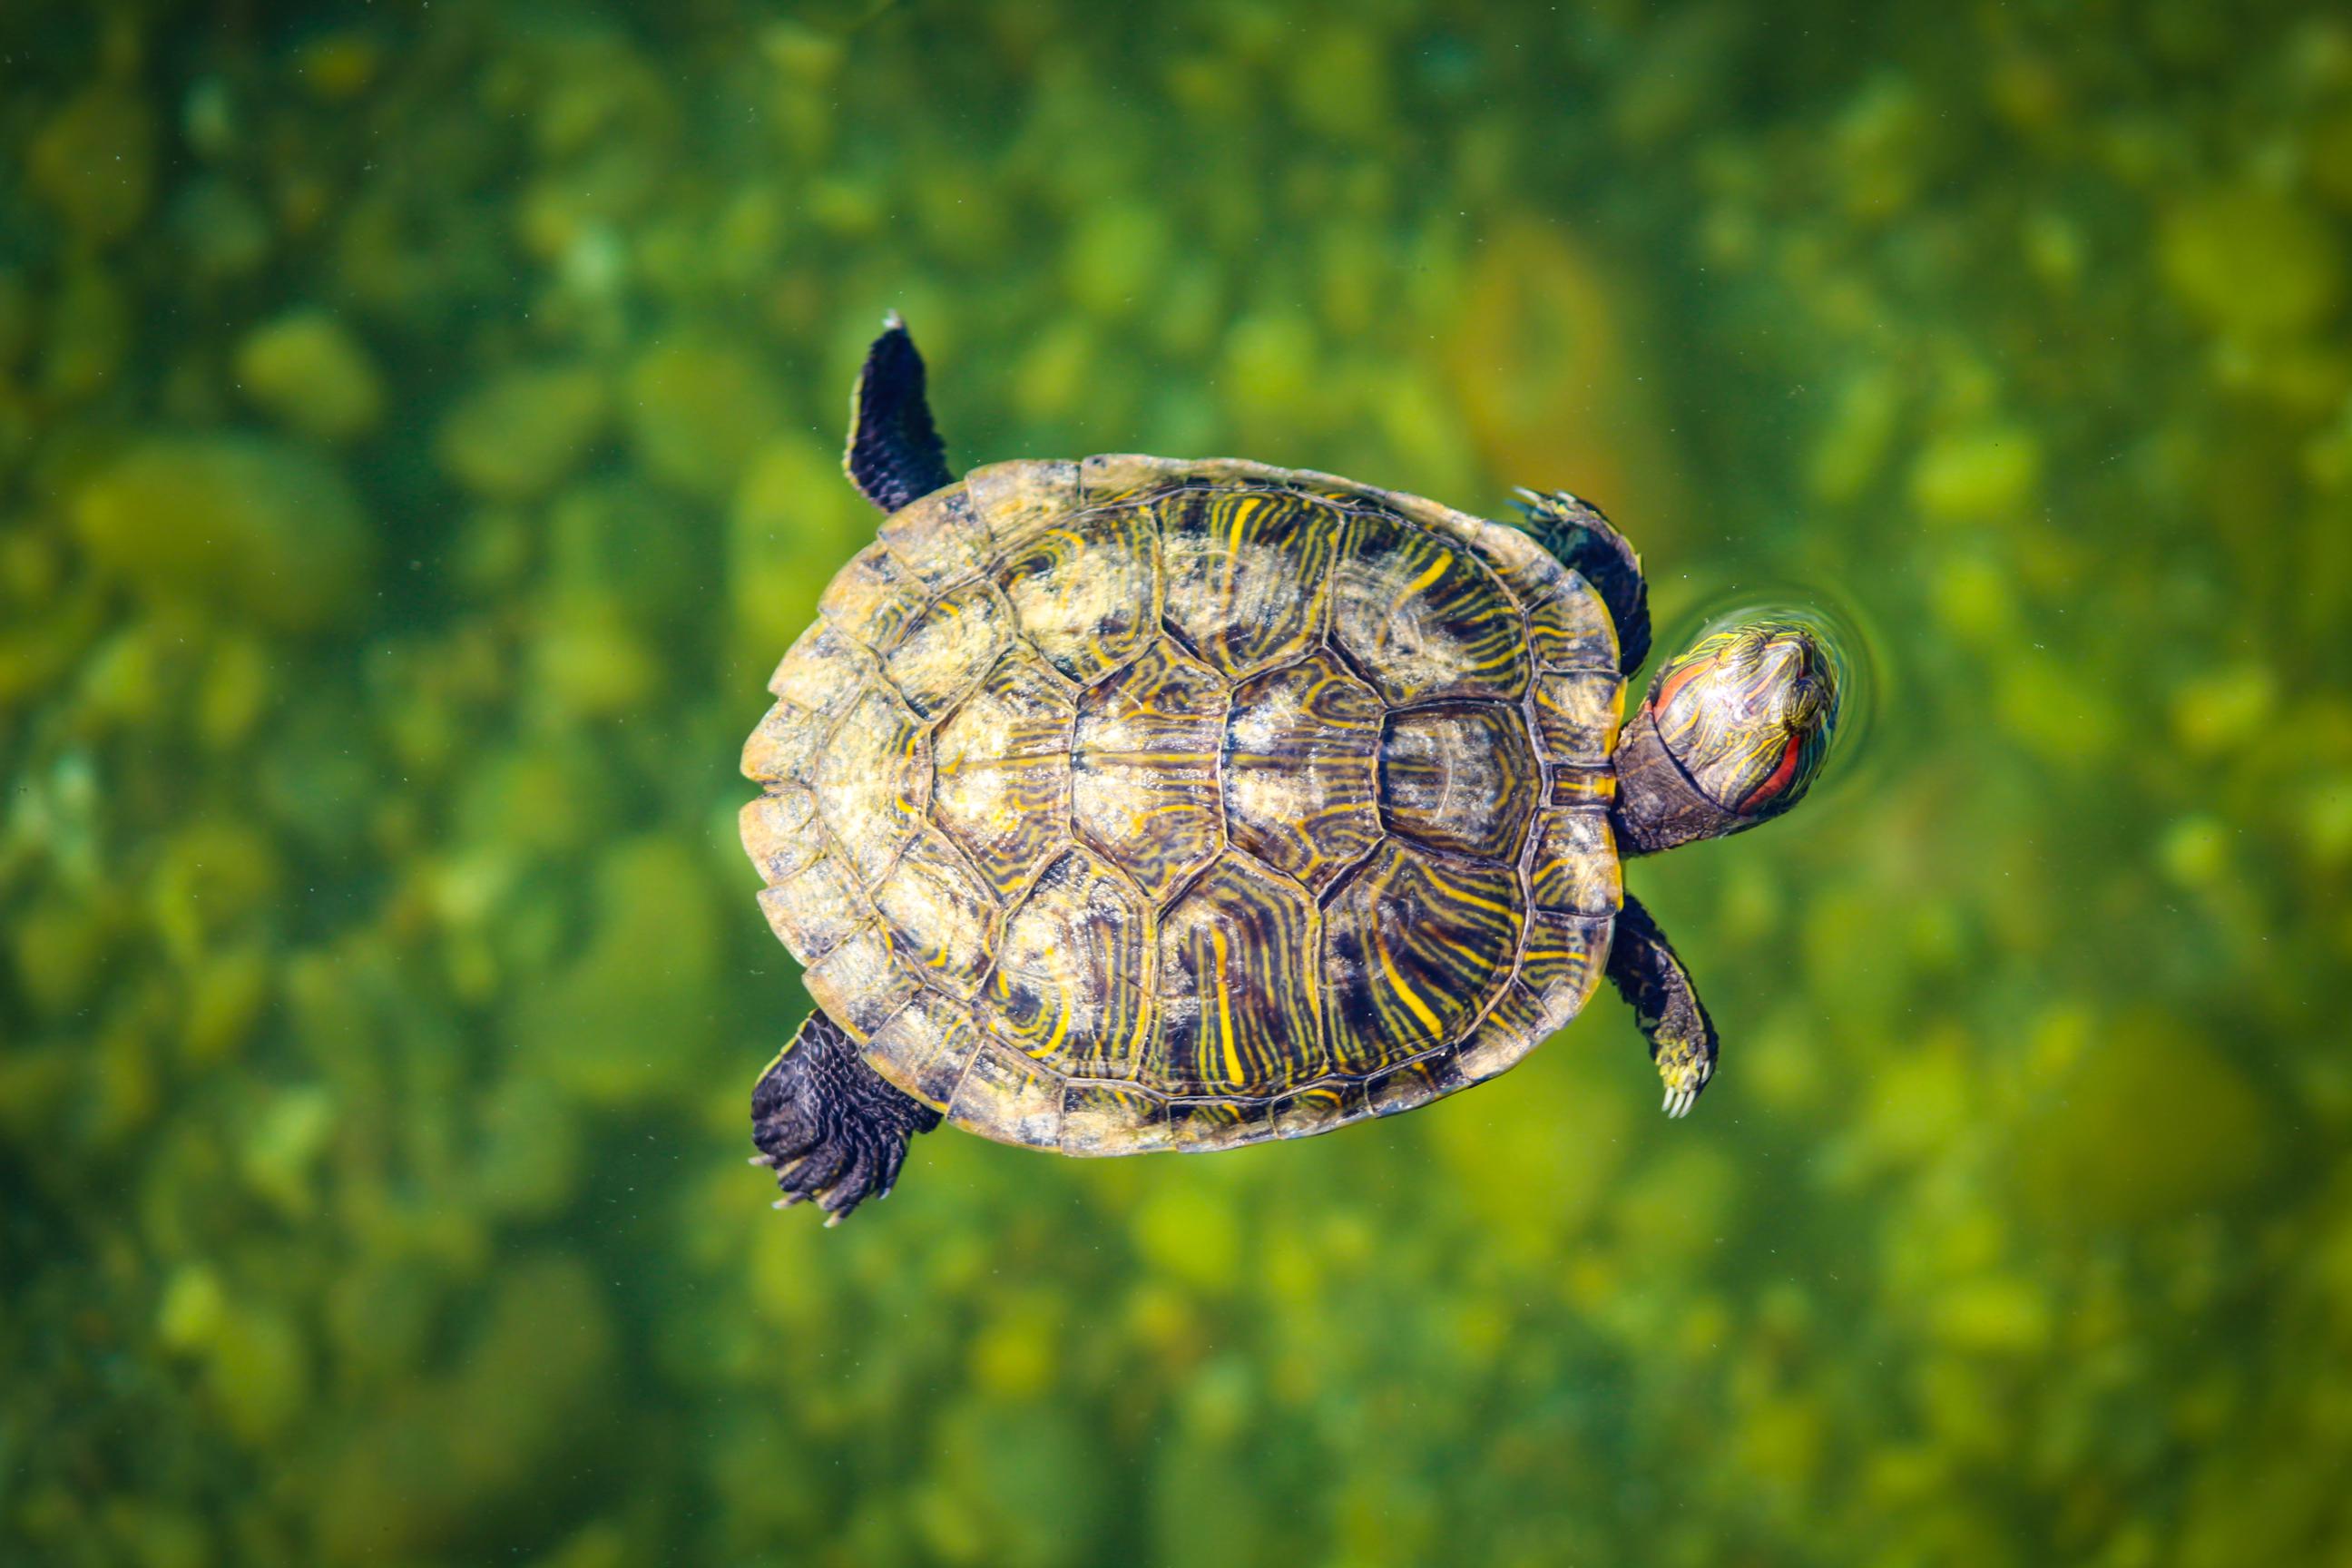 Causes of turtle floating